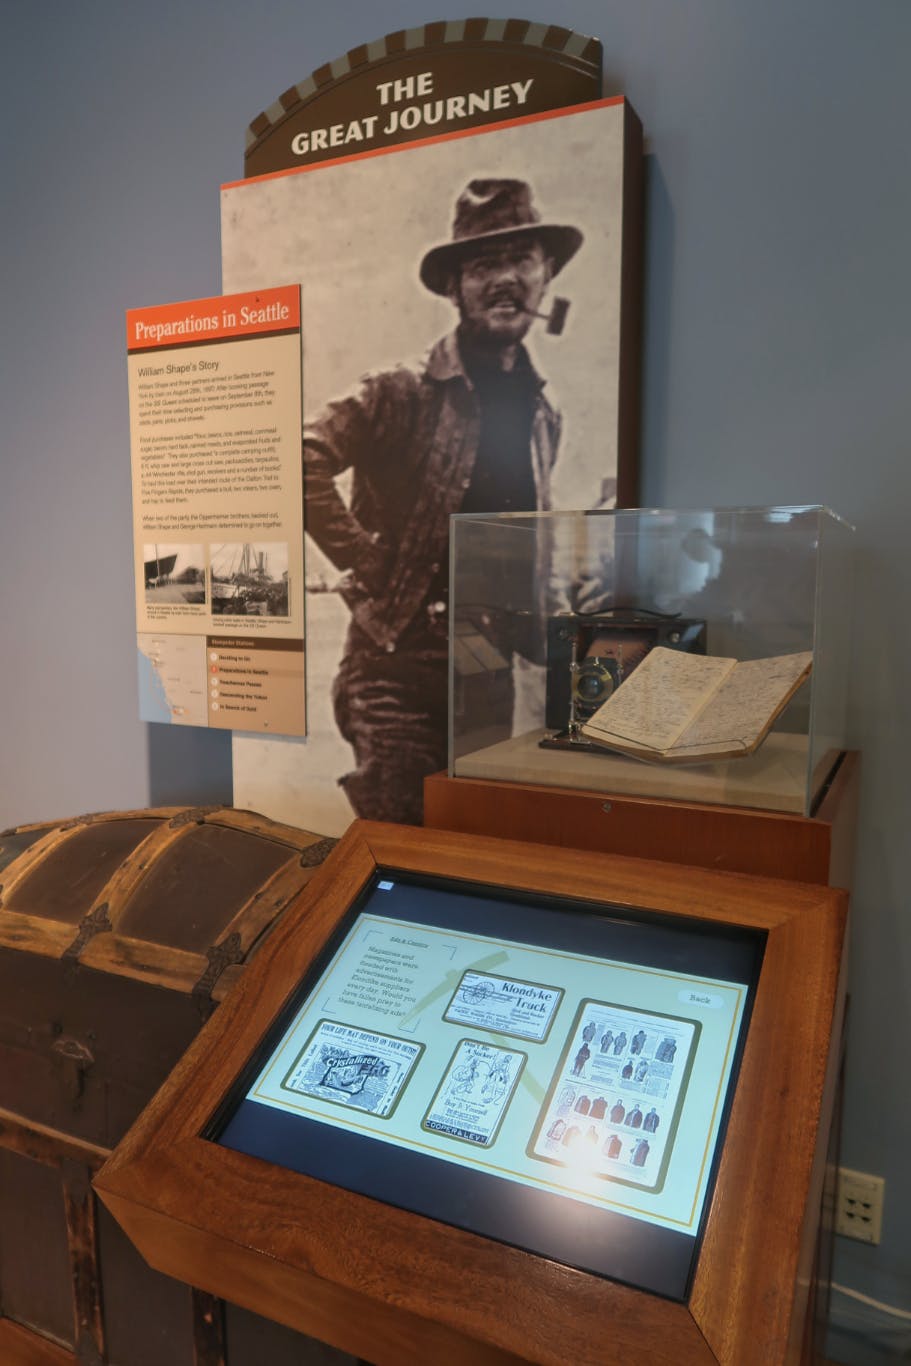 A digital informational plaque display alongside a physical exhibit on a gold miner's journey to the Yukon